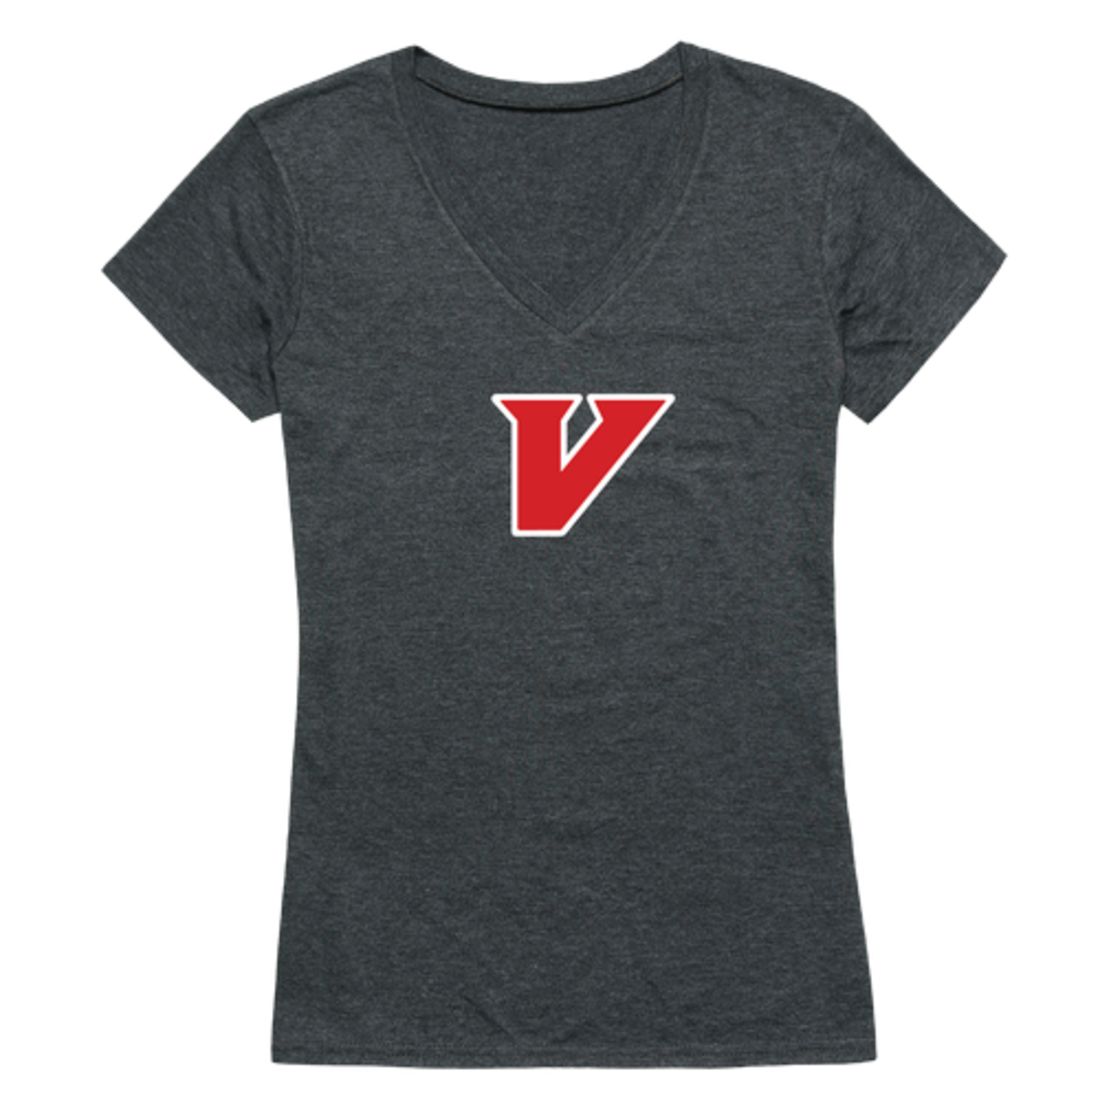 University of Virginia's College at Wise Cavaliers Womens Cinder T-Shirt Tee